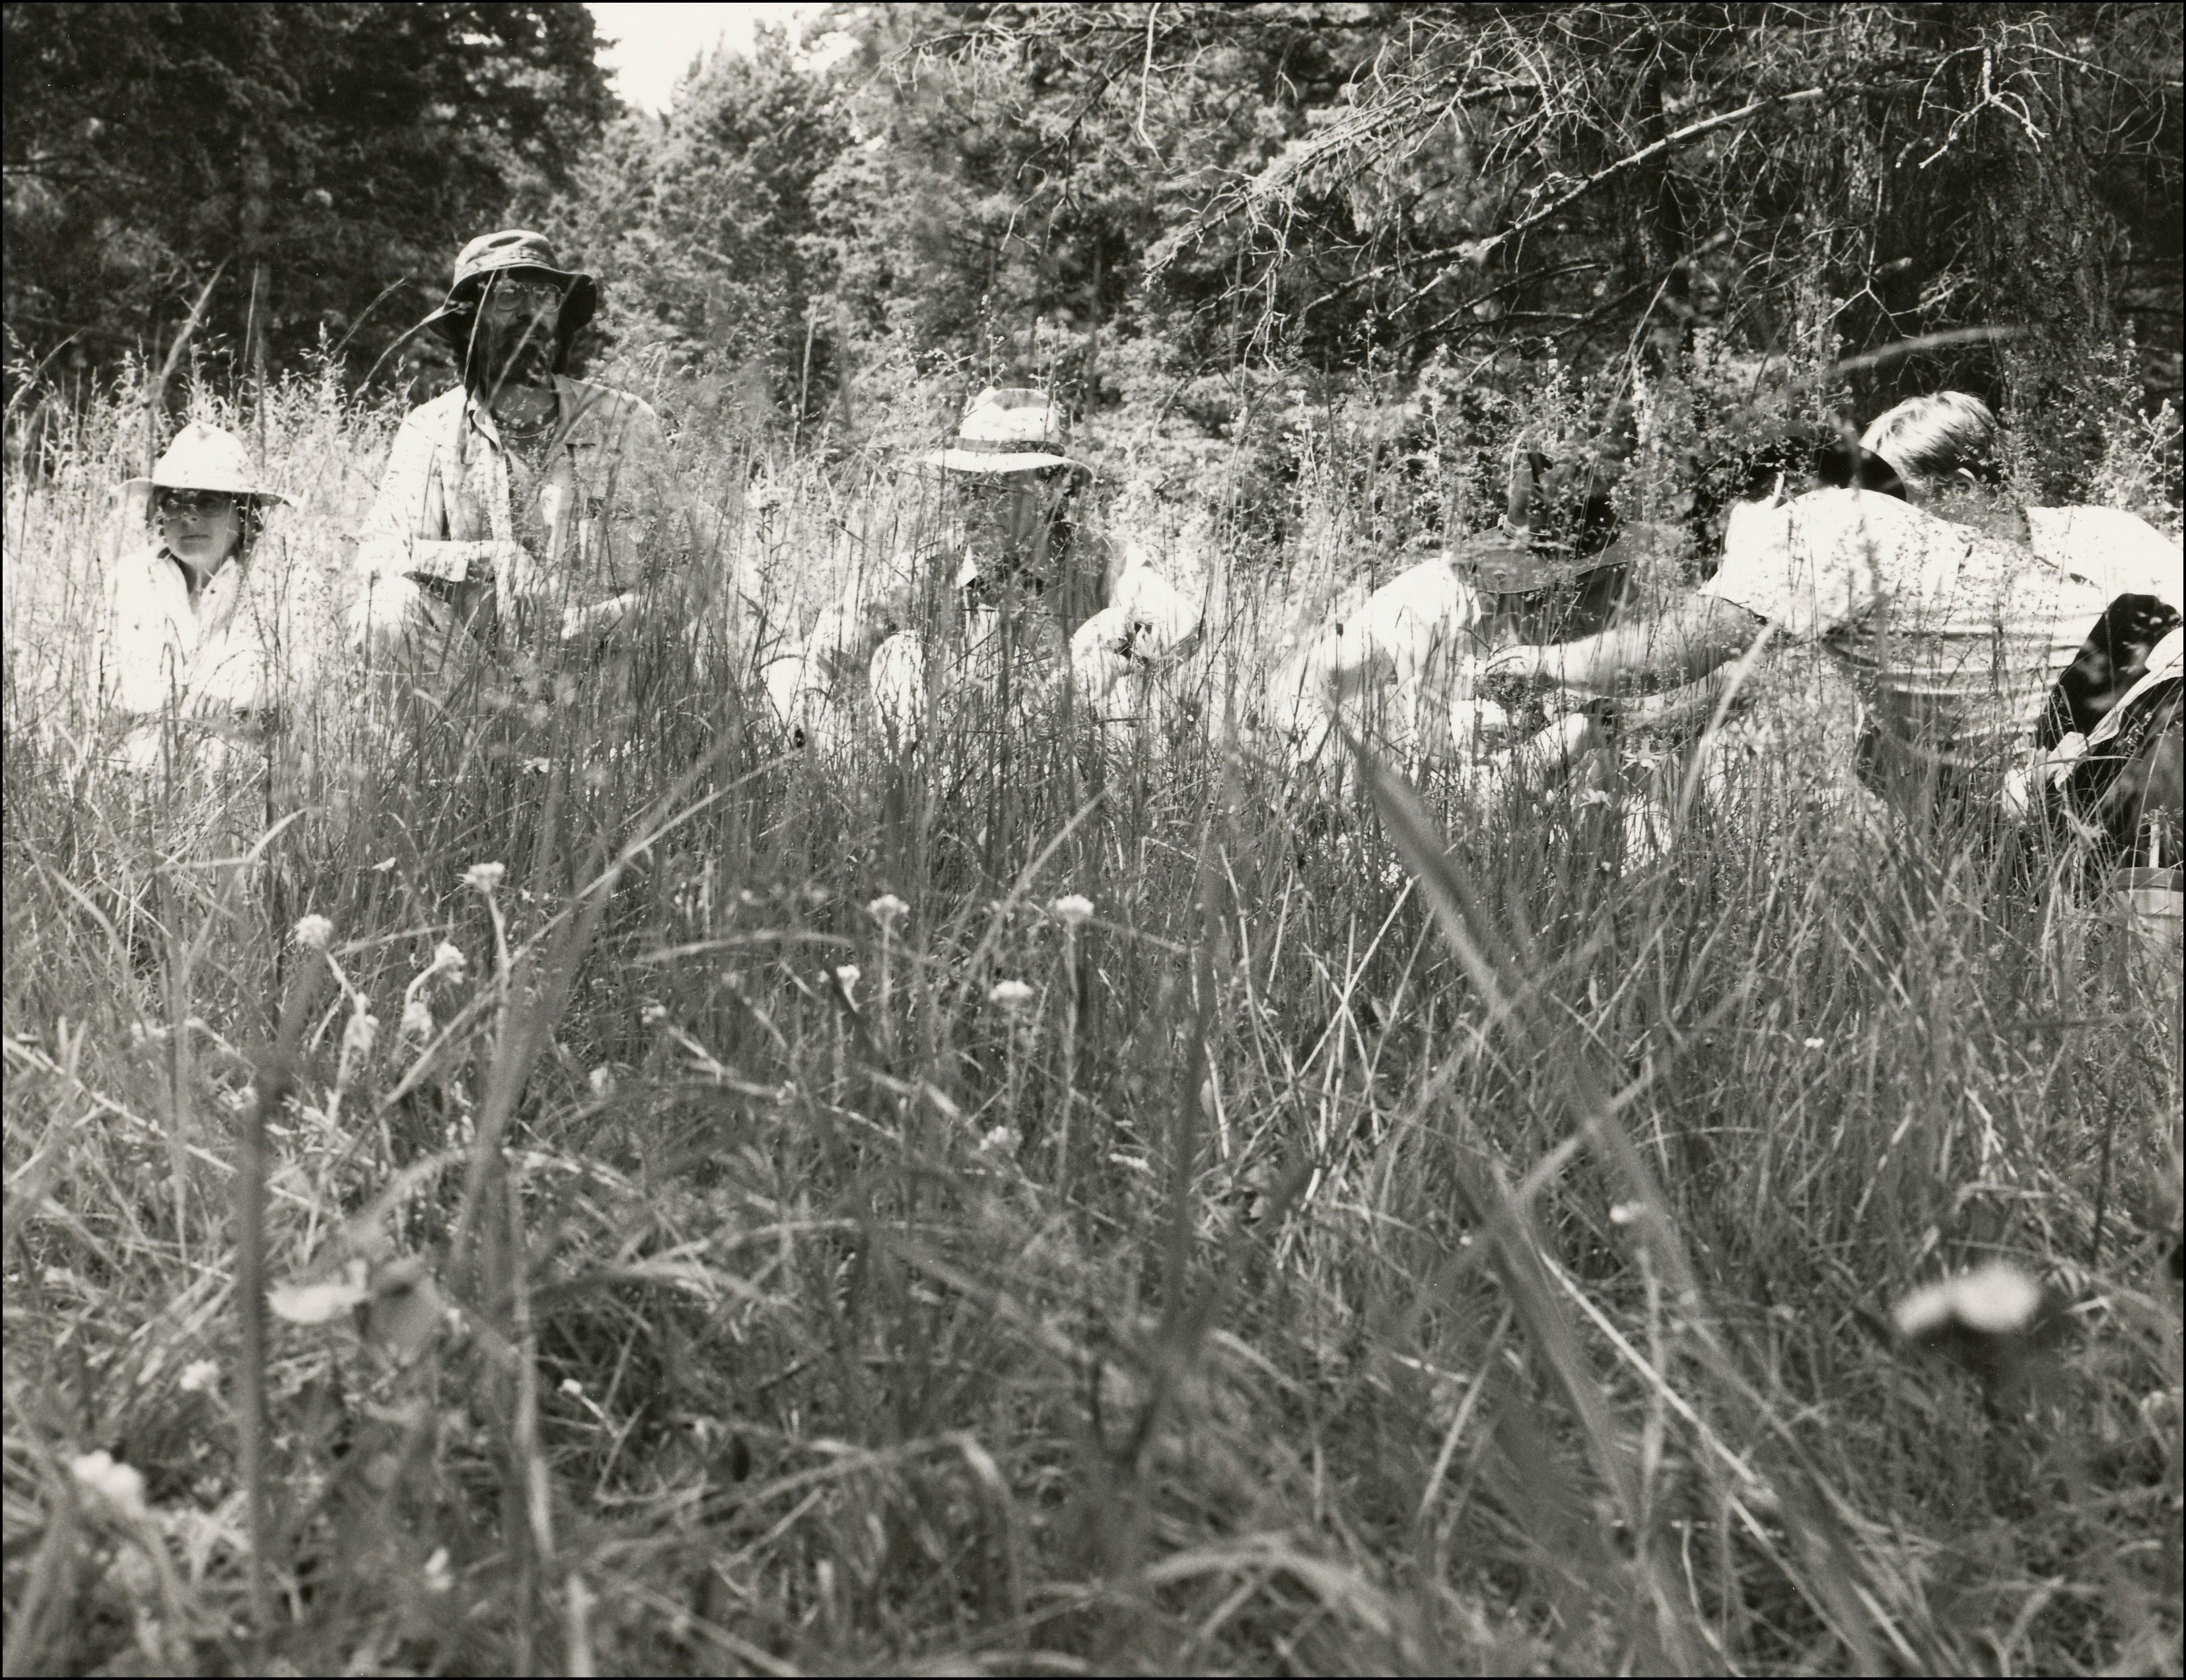 View through tall grass of several people on the other side with trees behind them.